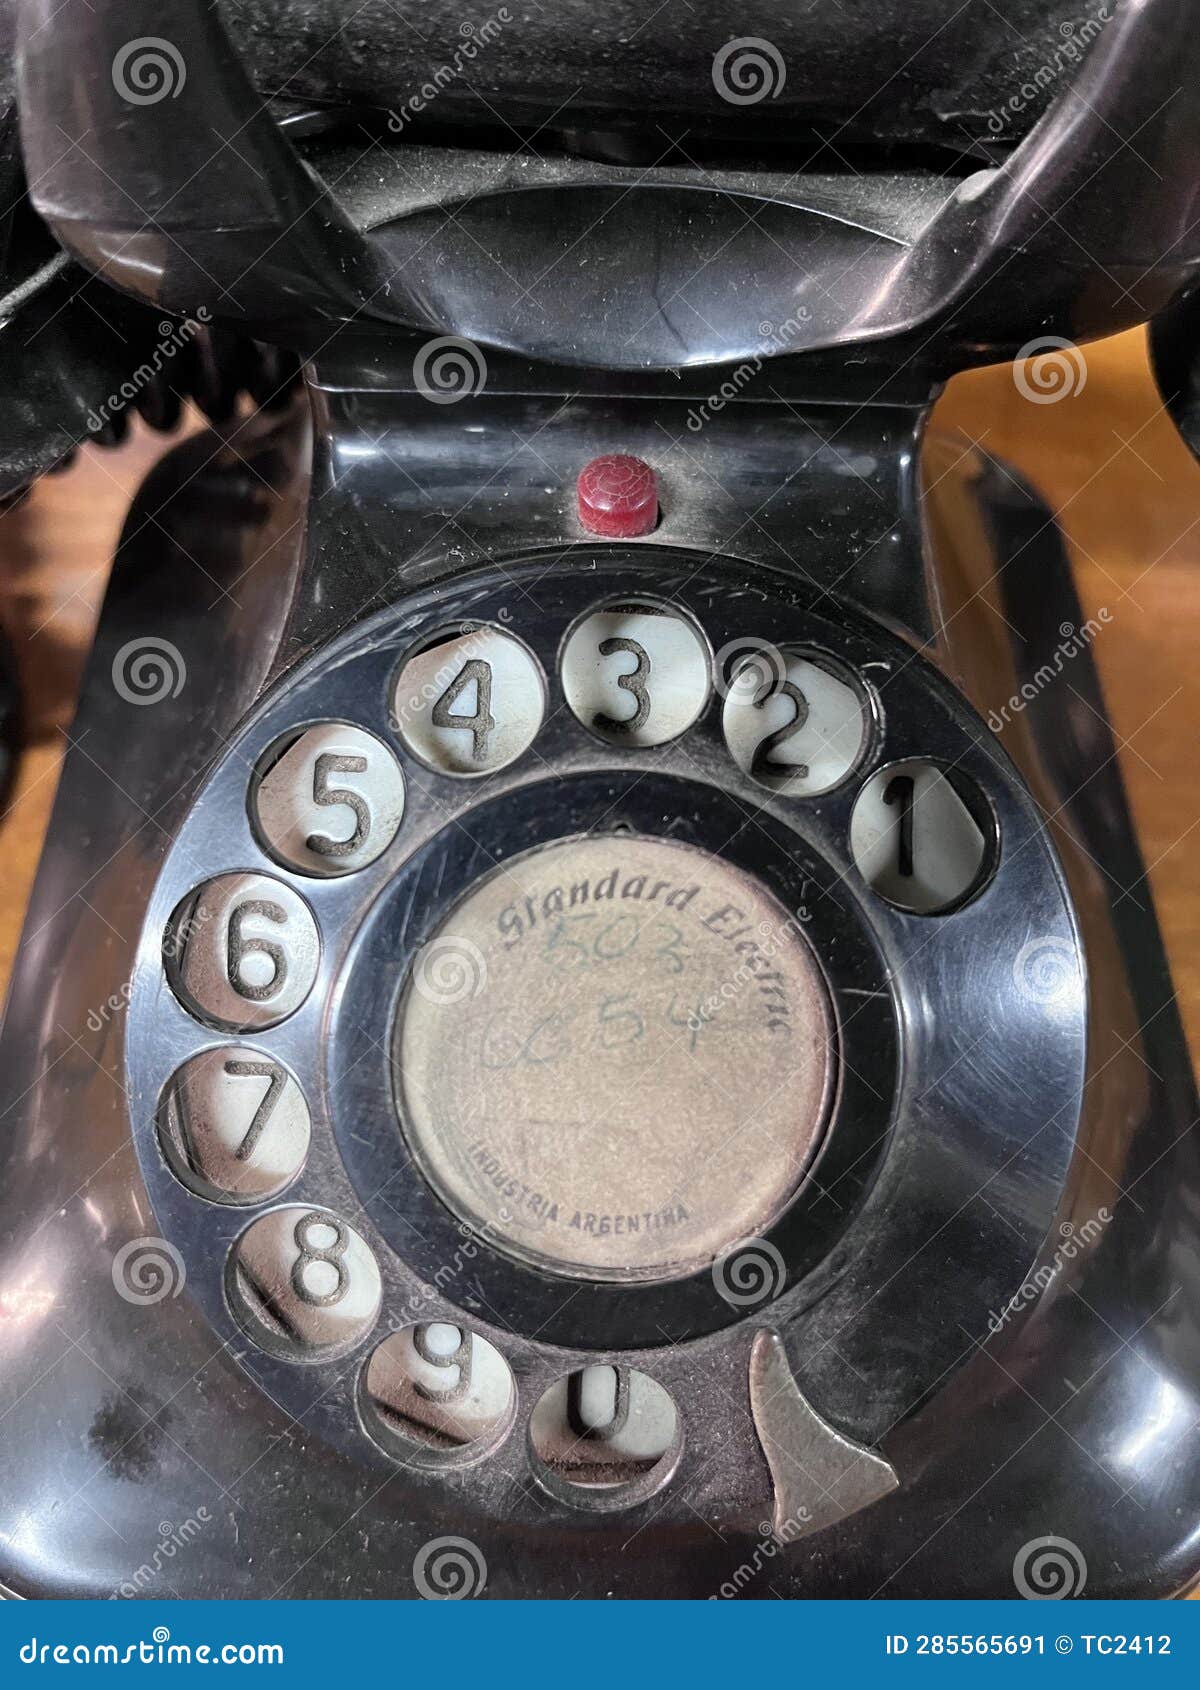 close up photo of an old phone